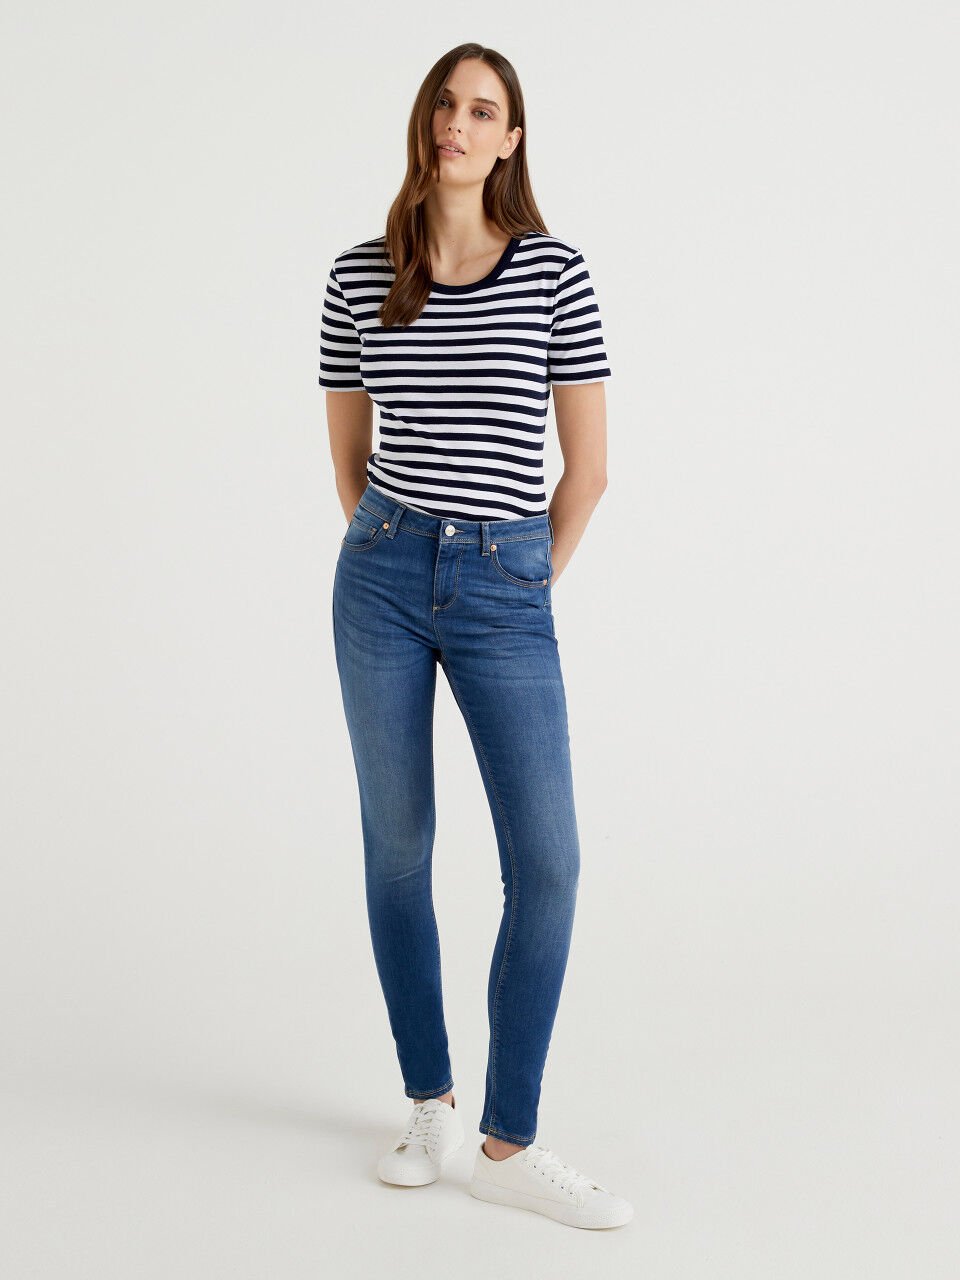 Skinny fit push up jeans